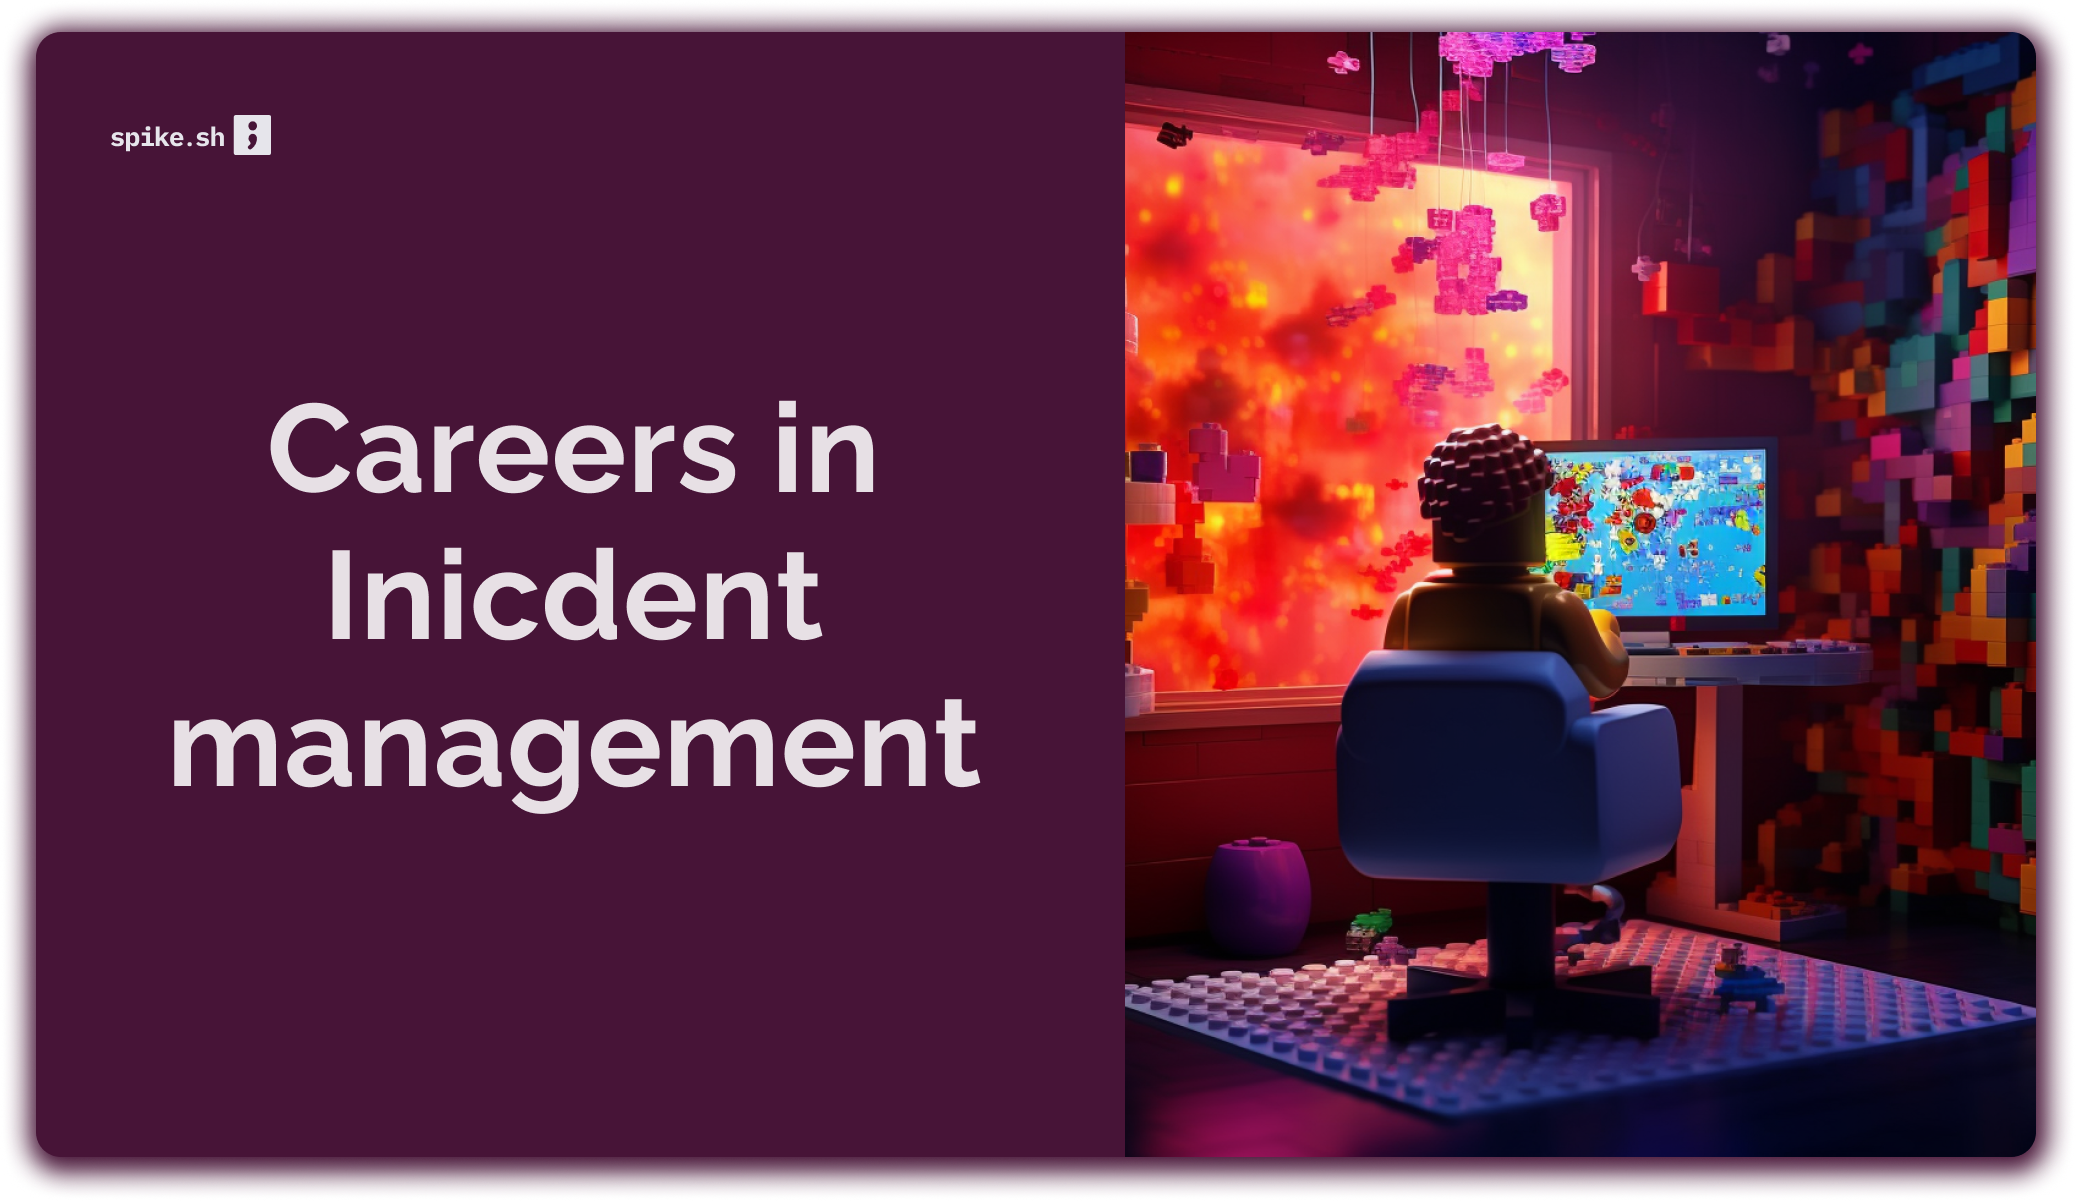 Starting with Incident management career